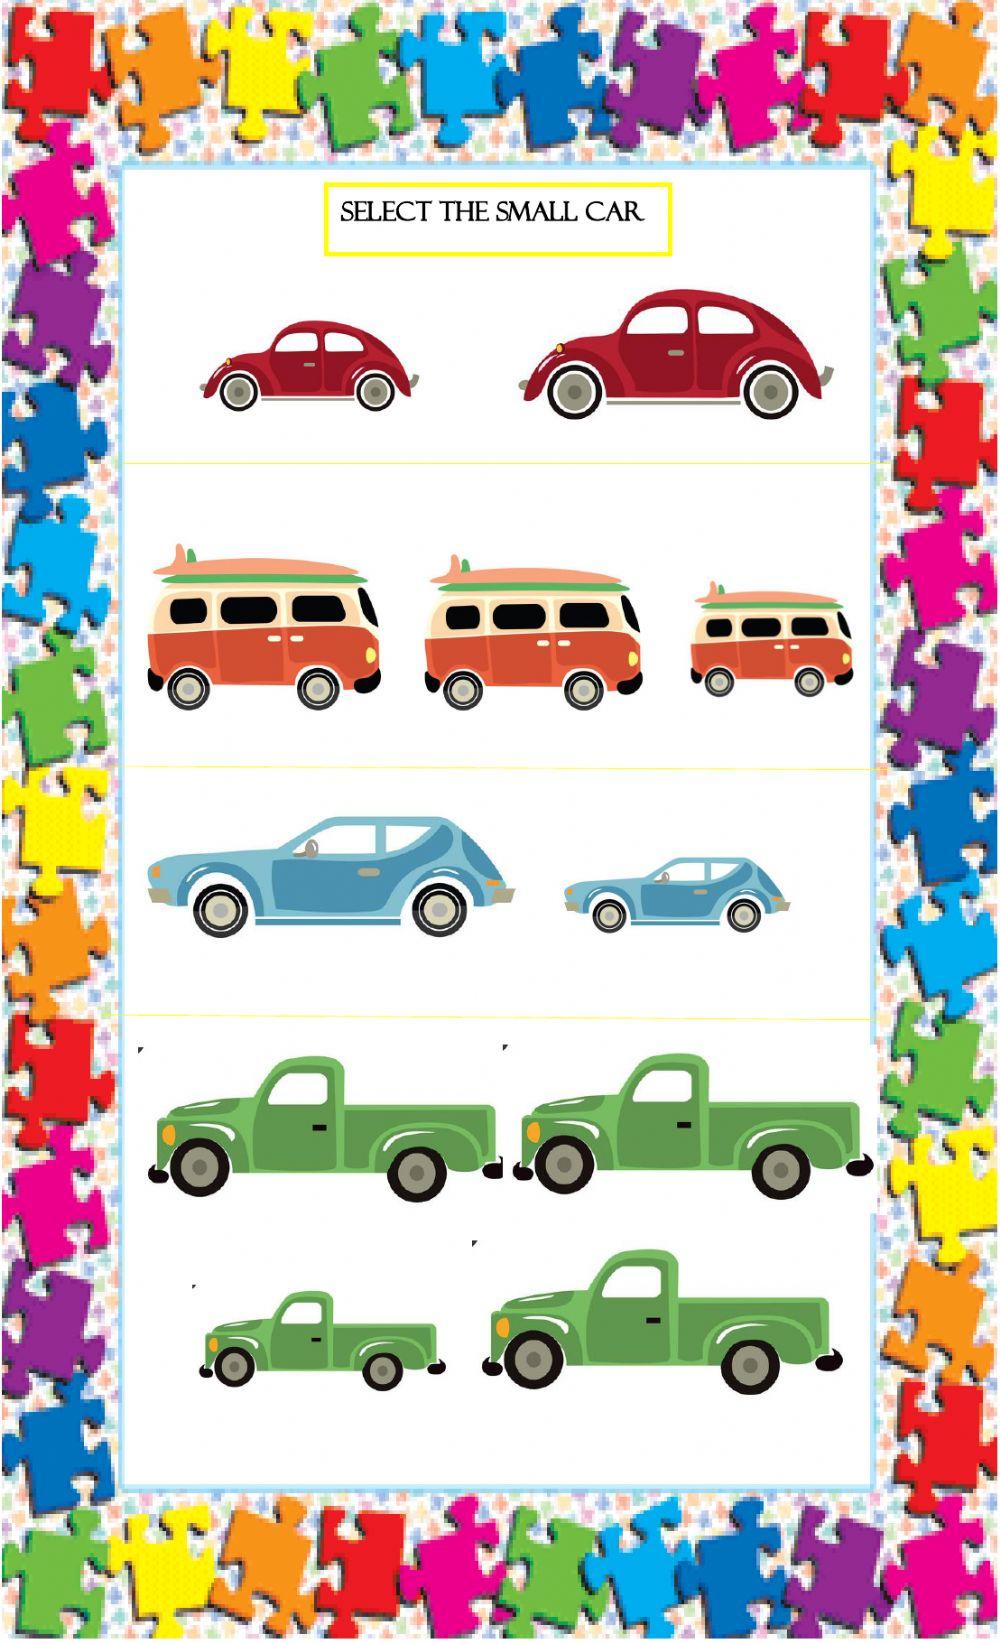 Select the small car